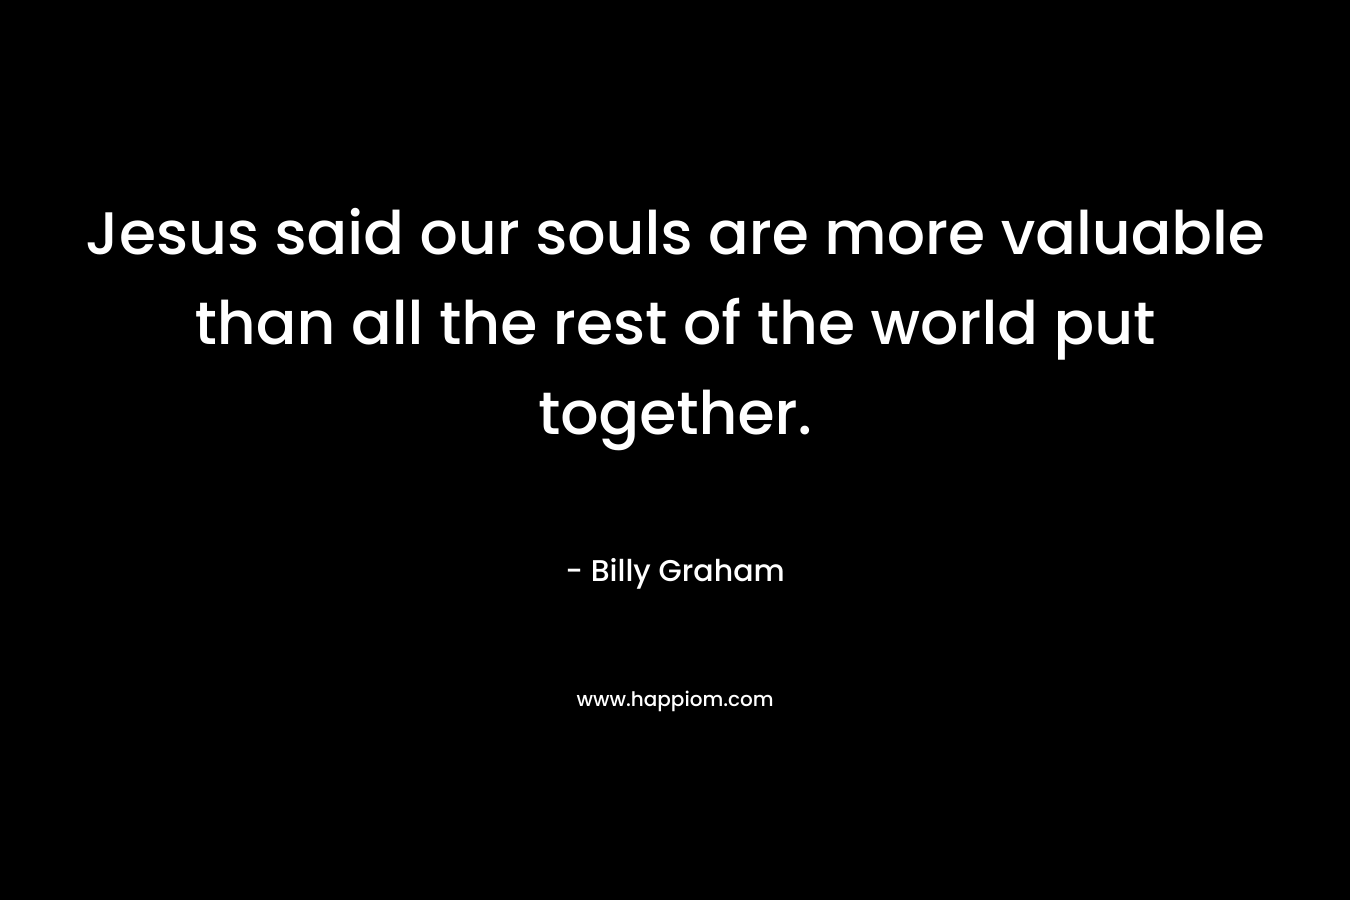 Jesus said our souls are more valuable than all the rest of the world put together.